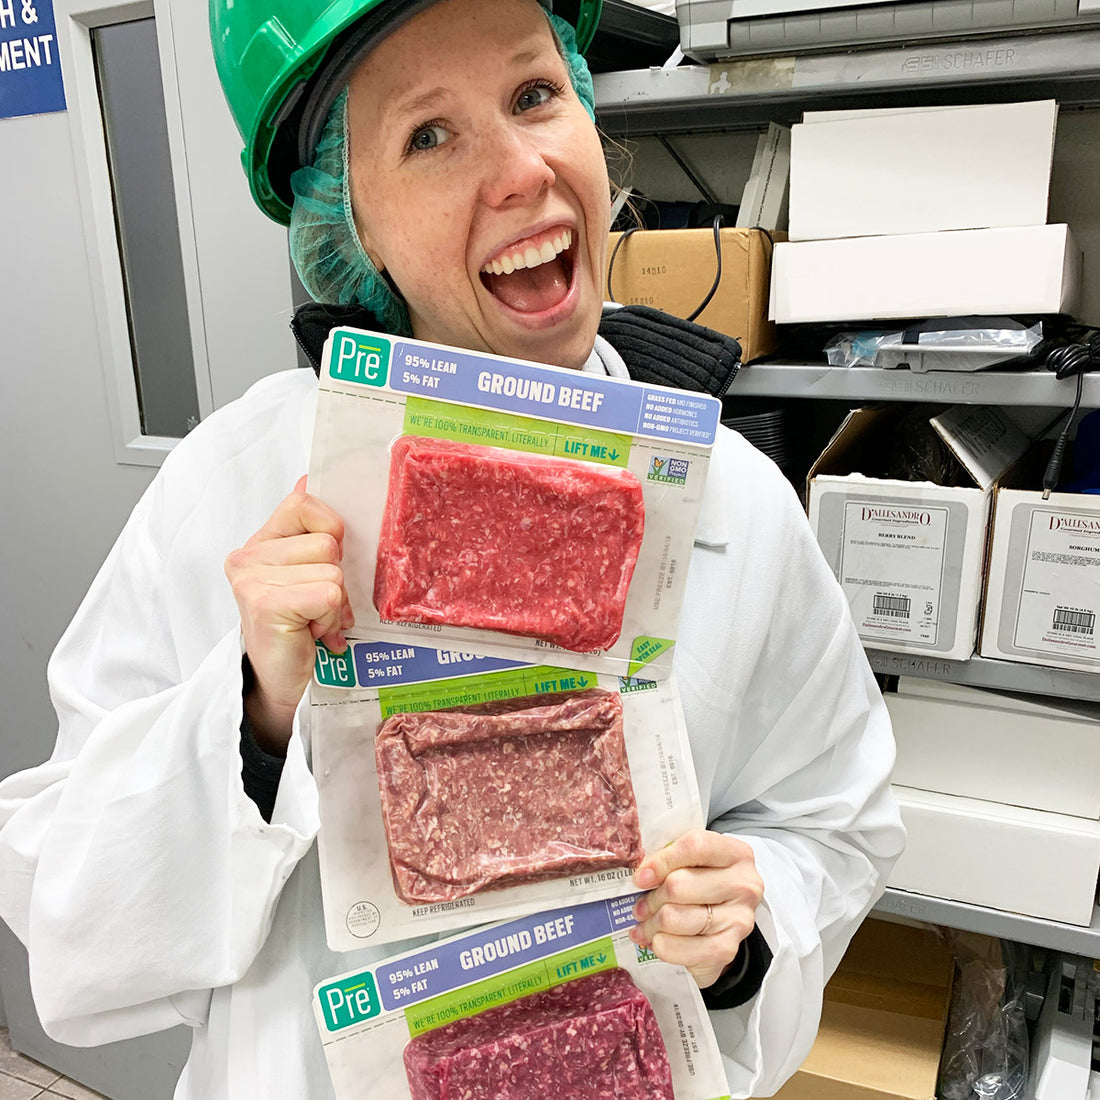 Julie, the food scientist and quality manager at Pre brands, holidng different beef packages that have different shades of pink and brown meat in them.